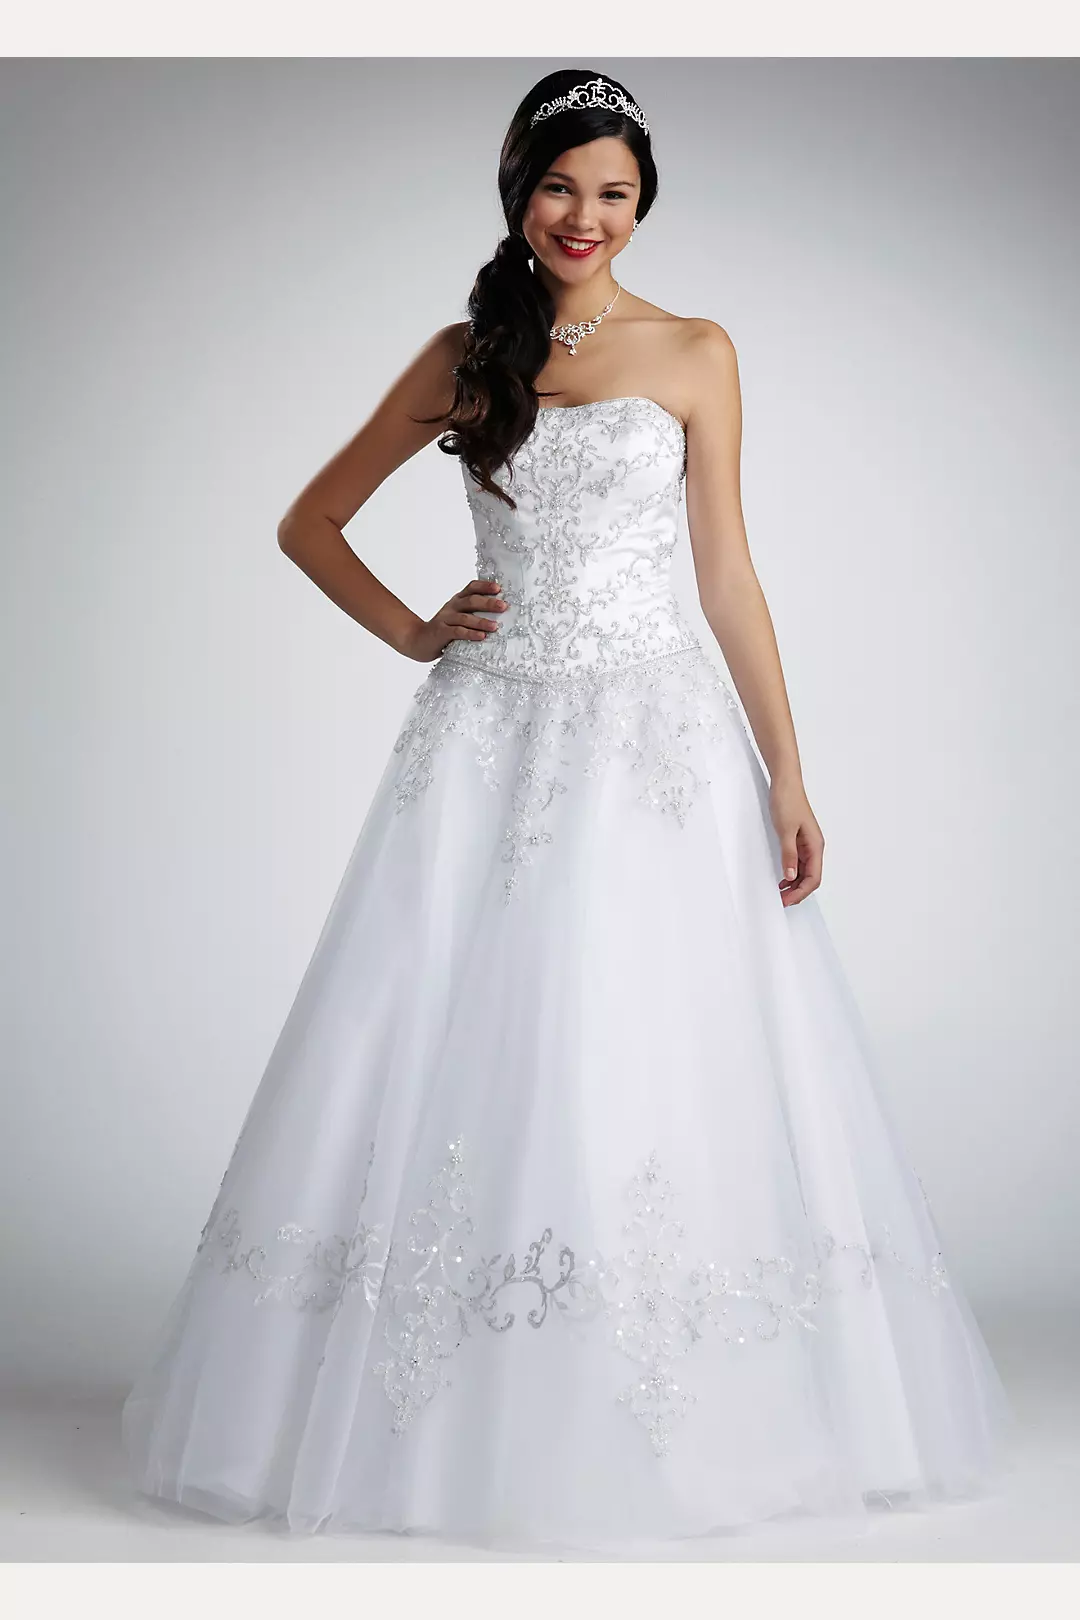 a classic wedding ballgown with a strapless embellished bodice and